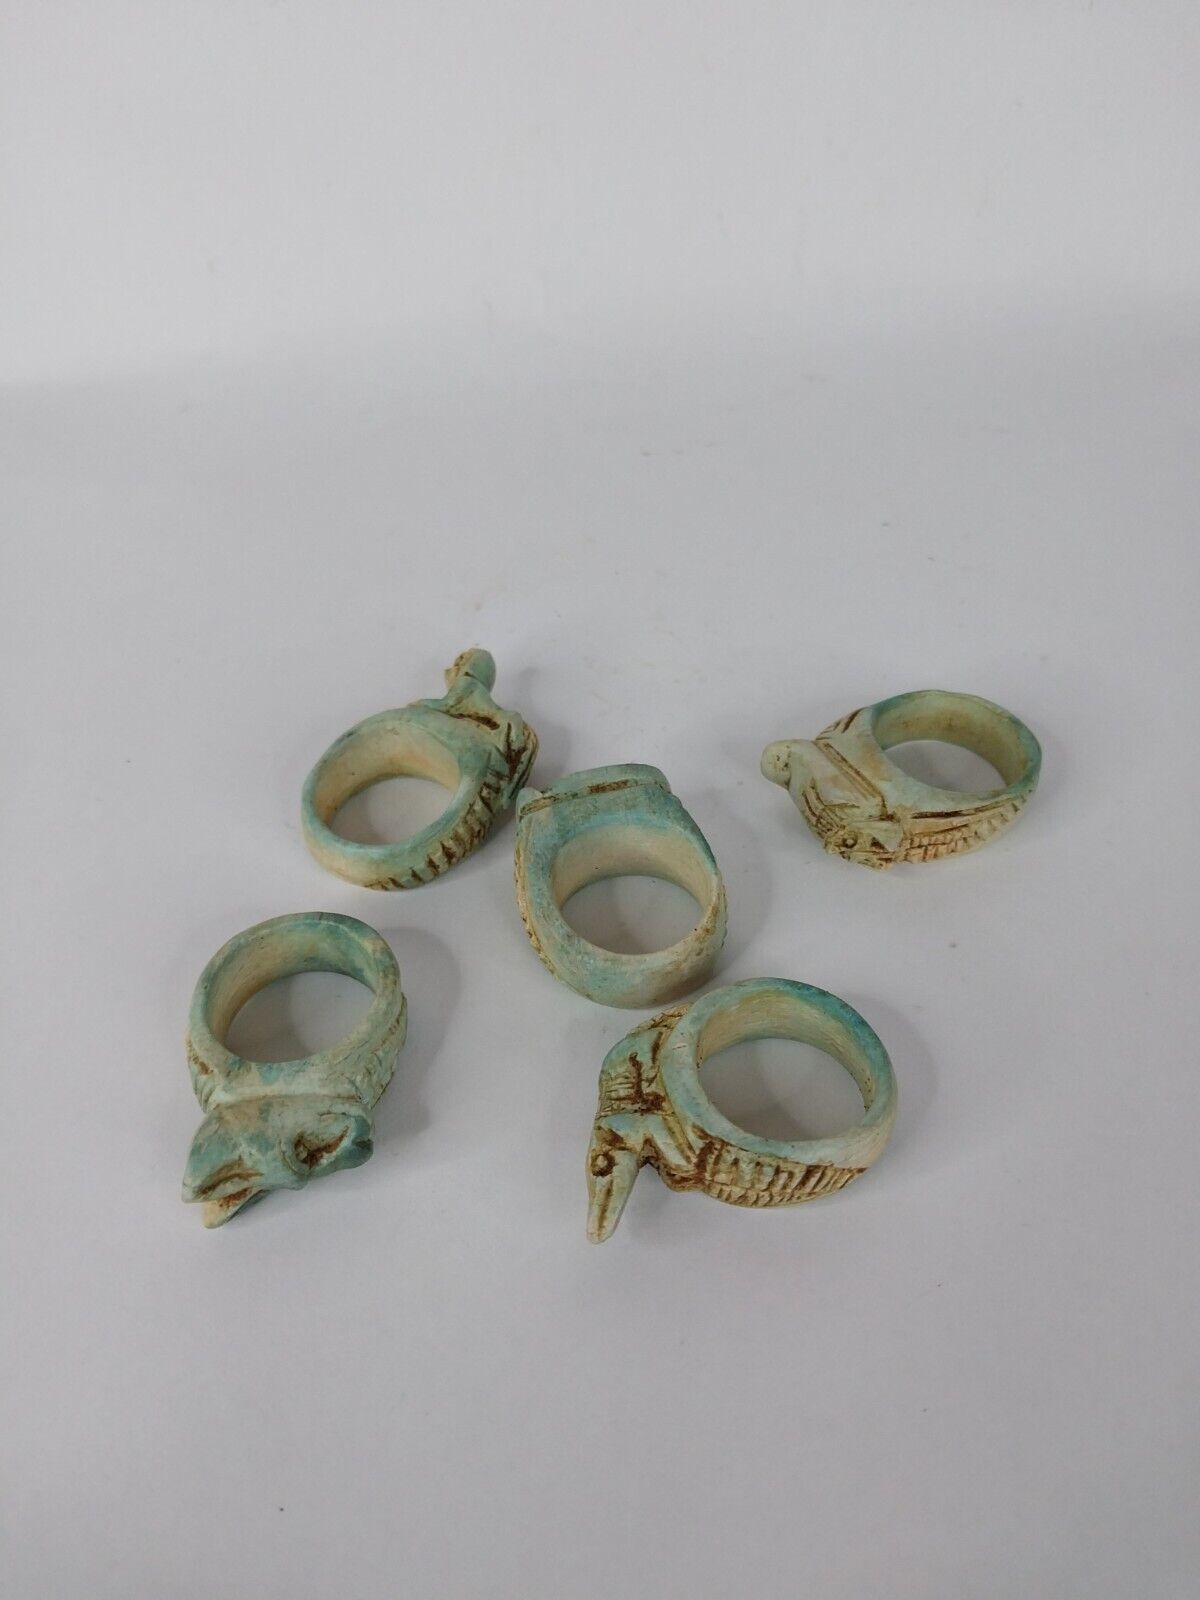 RARE ANCIENT EGYPTIAN ANTIQUE 5 Ring Small Amulet Pharaonic Egyptian